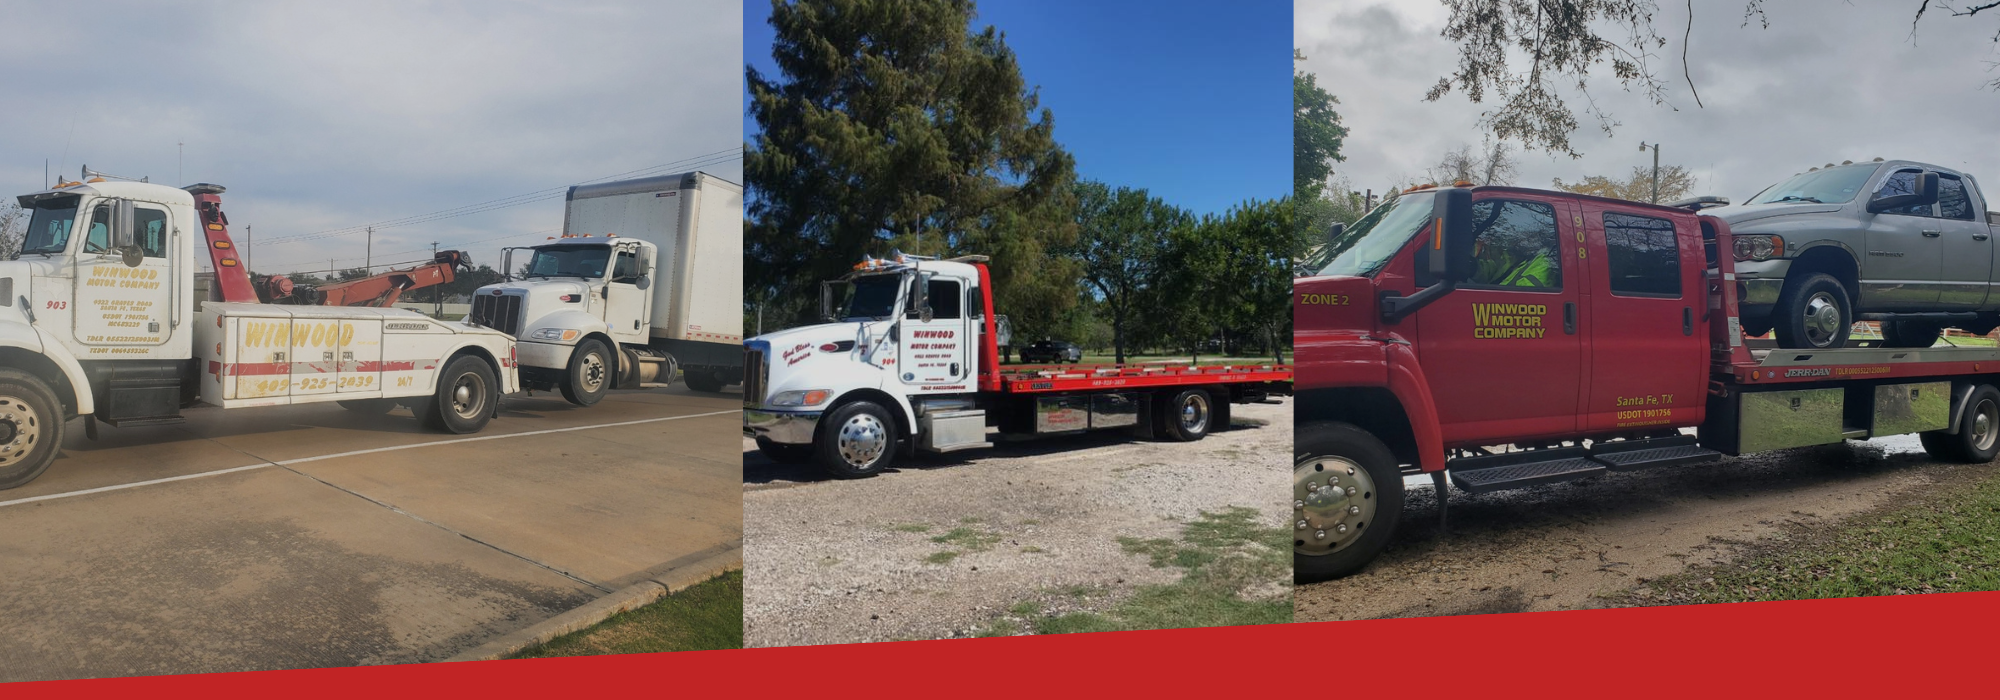 collage of towing trucks with one towing truck hauling a freezer